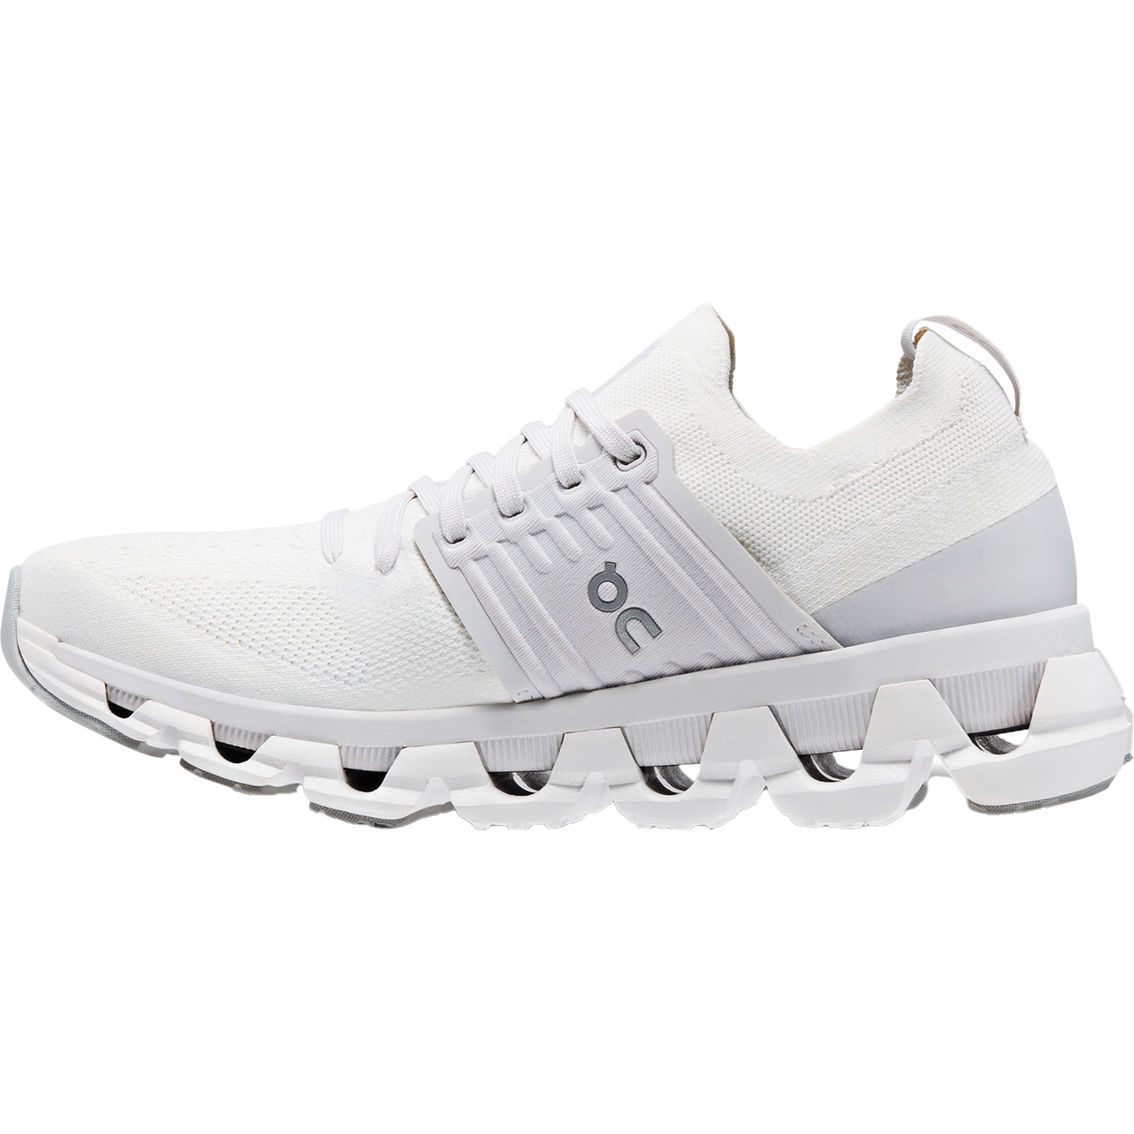 On Women's Cloudswift 3 Running Shoes | Women's Athletic Shoes | Shoes ...